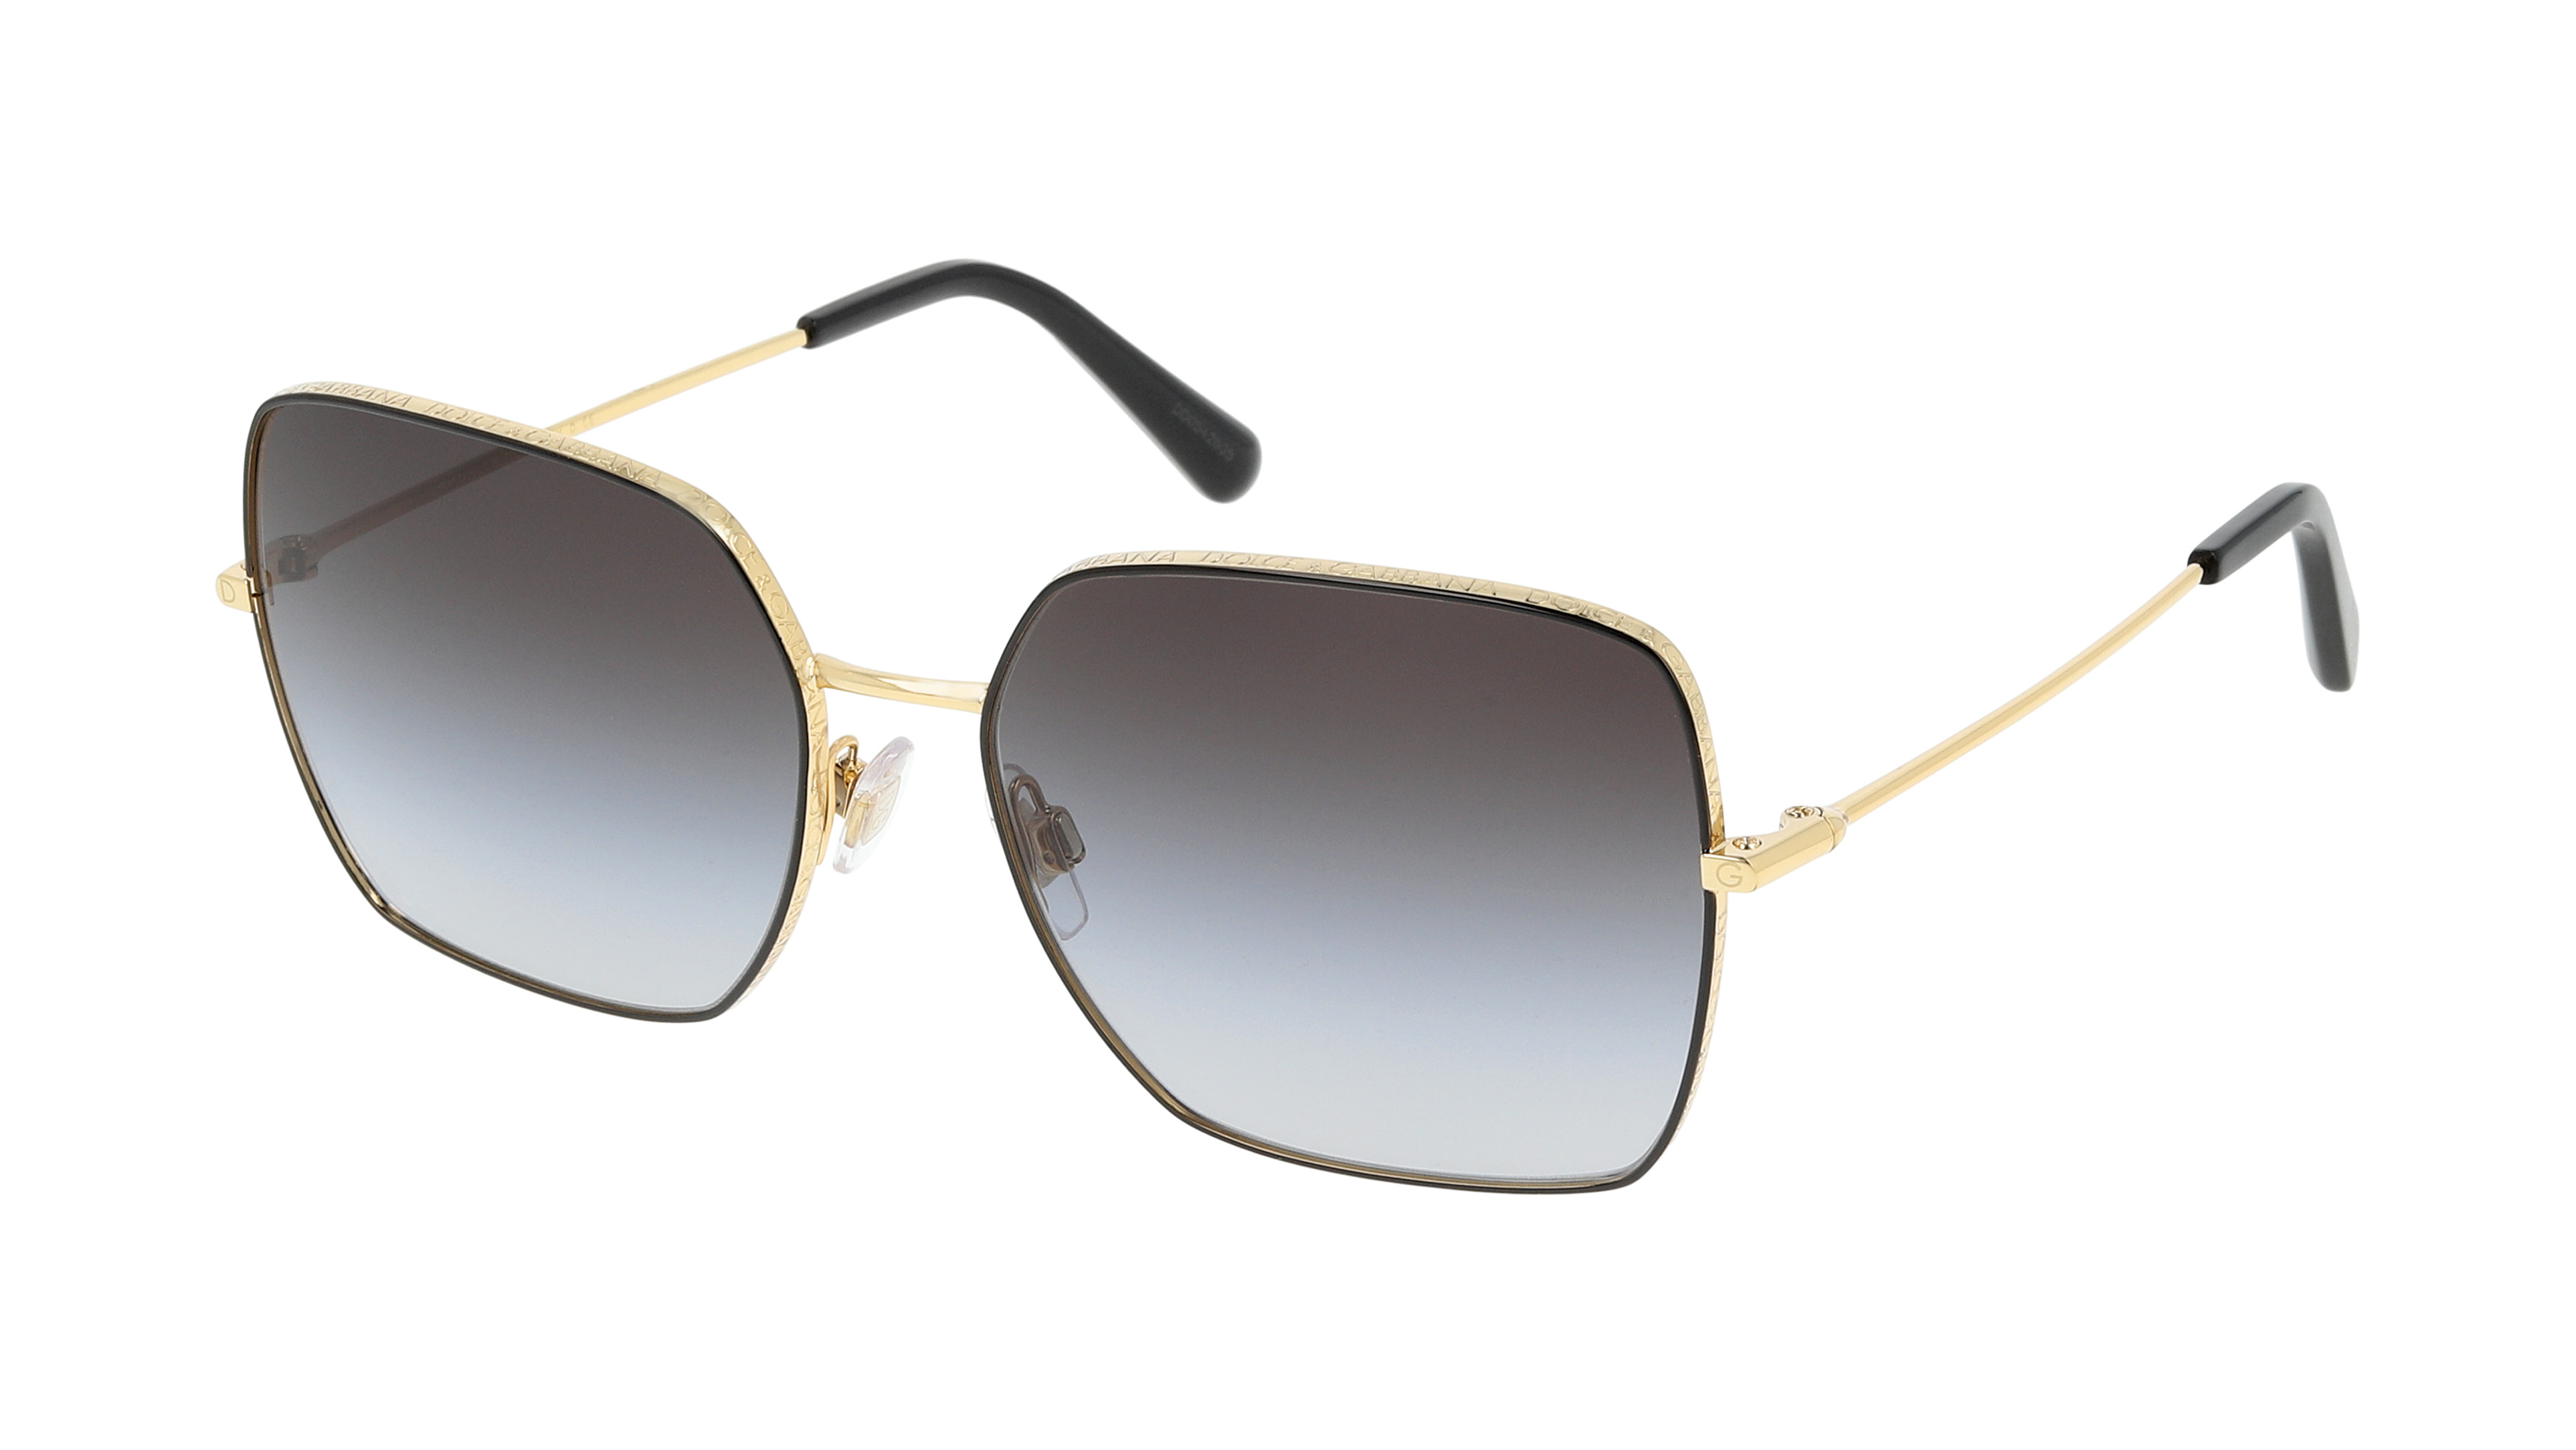 [products.image.angle_left01] Dolce&Gabbana 0DG2242 13348G Sonnenbrille